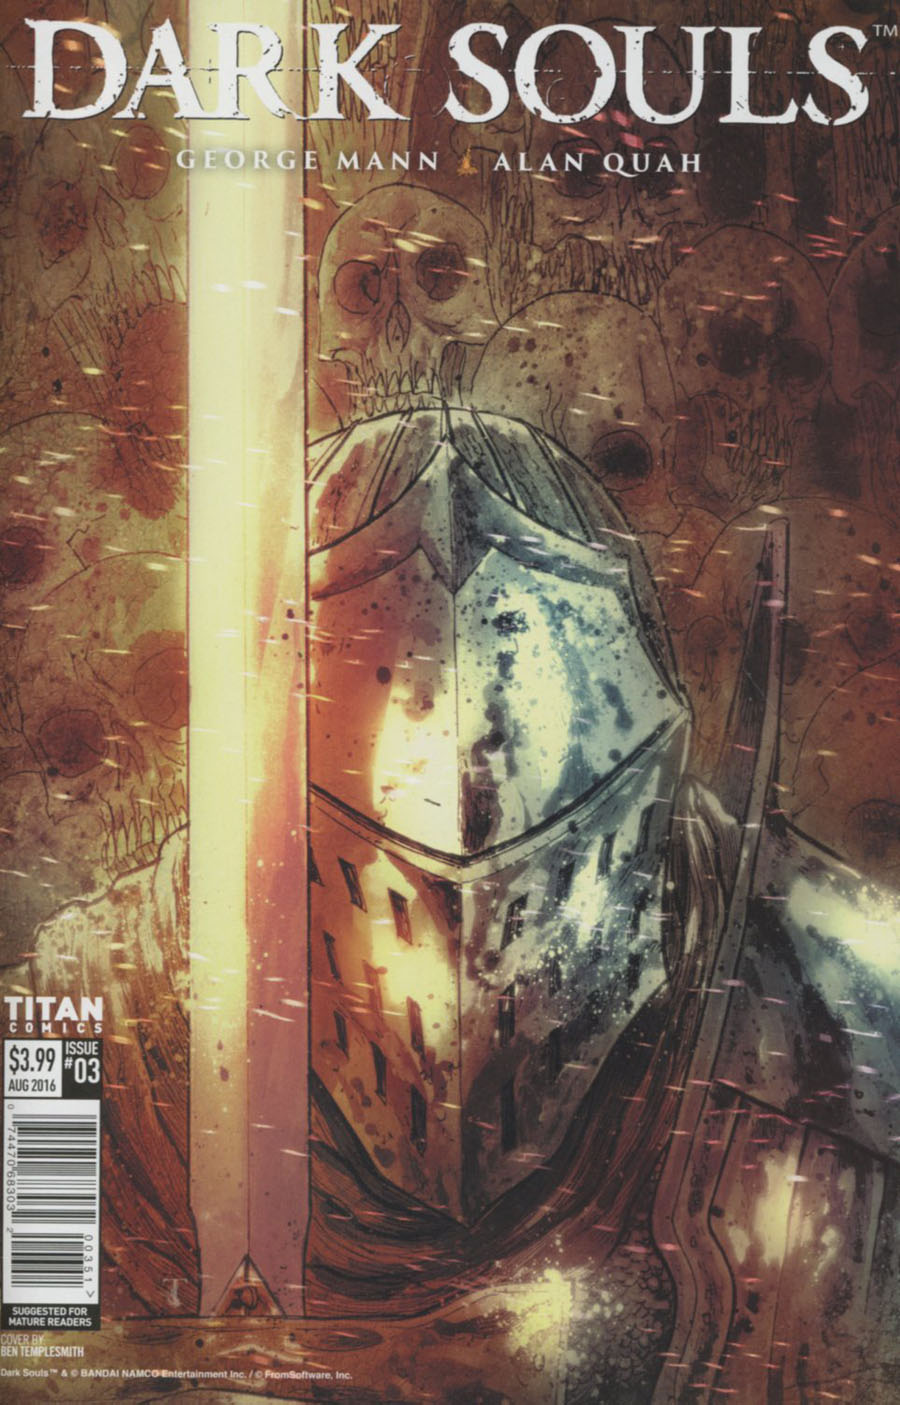 Dark Souls #3 Cover D SDCC Exclusive Ben Templesmith Variant Cover